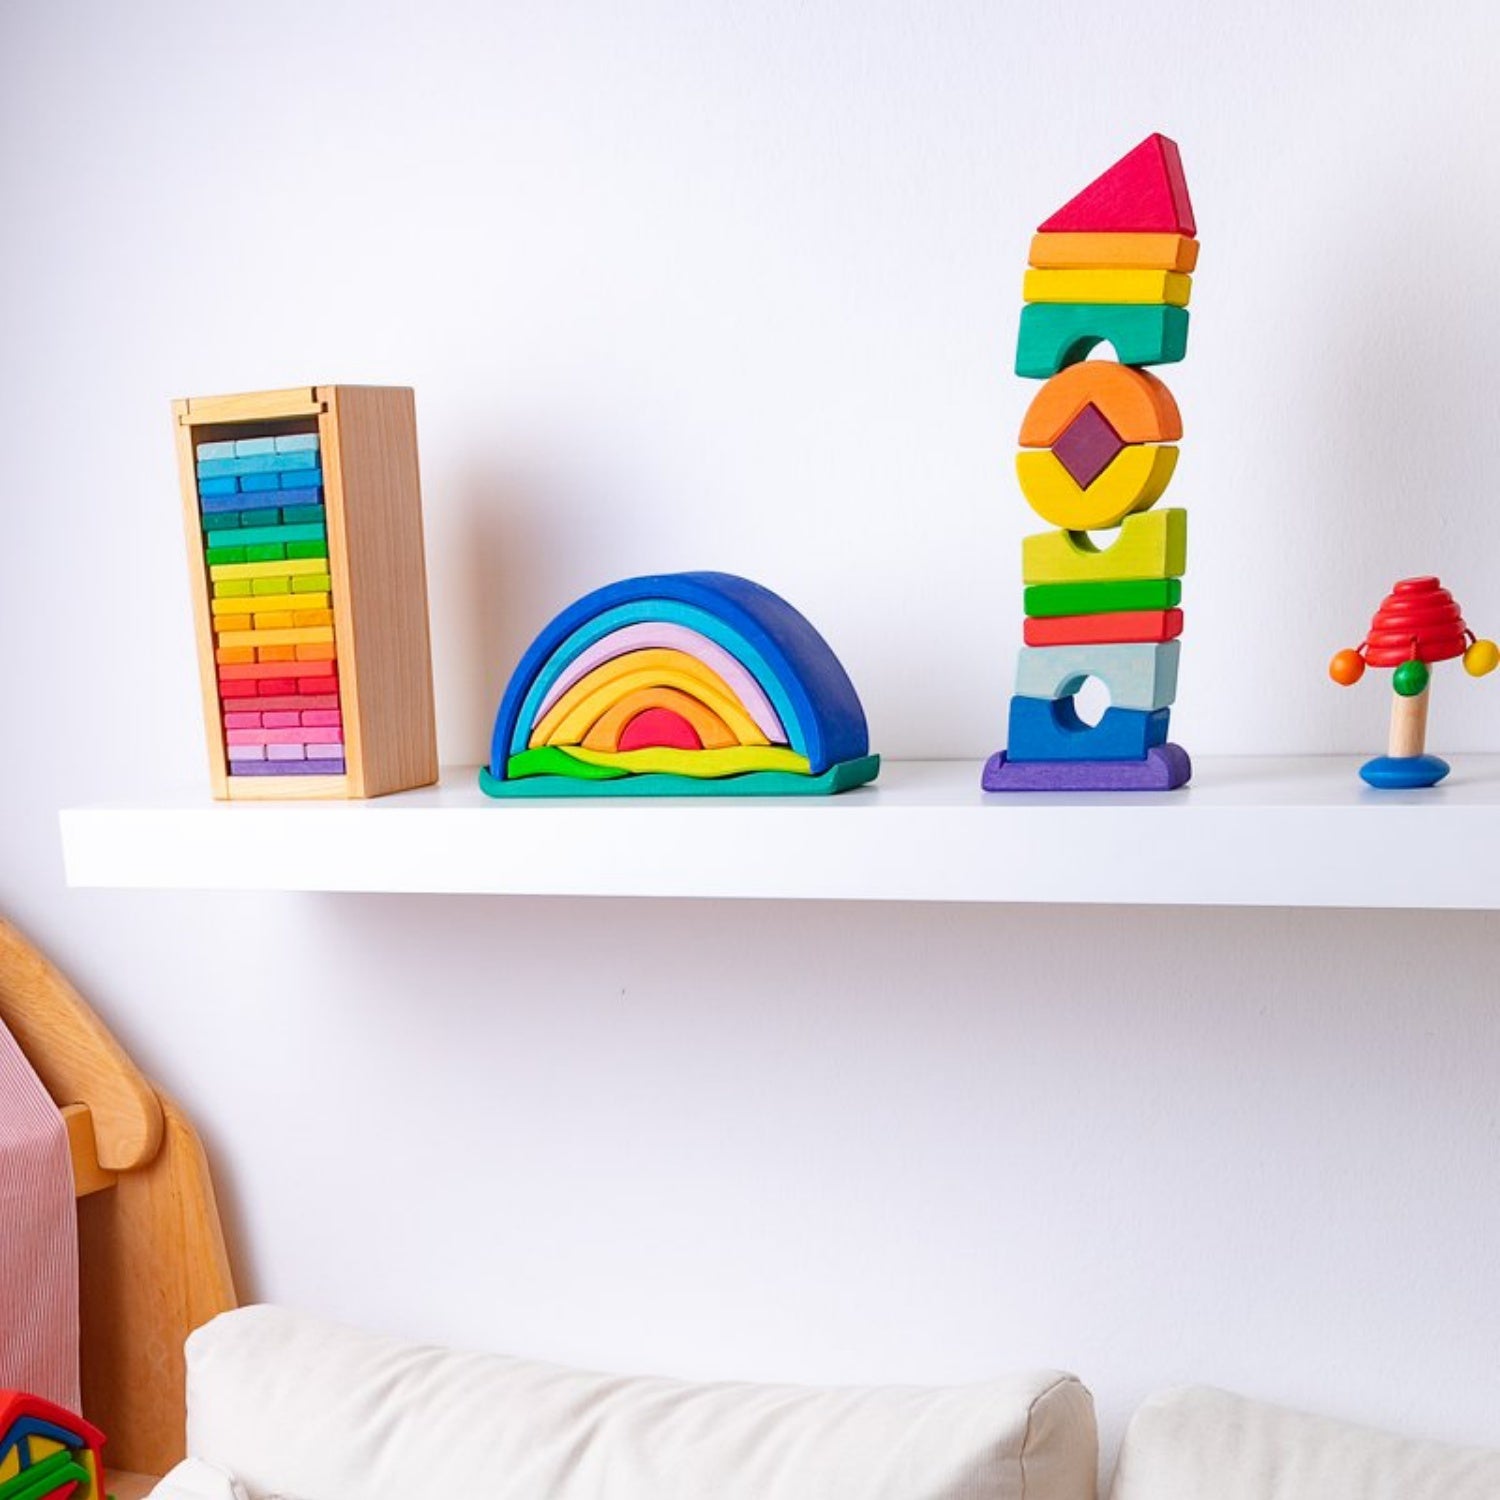 Gluckskafer Crooked Tower Wooden Blocks | Imaginative Play Wooden Toys | Waldorf Education and Montessori Education | Lifestyle: Crooked Tower Wooden Blocks on Shelf | BeoVERDE.ie